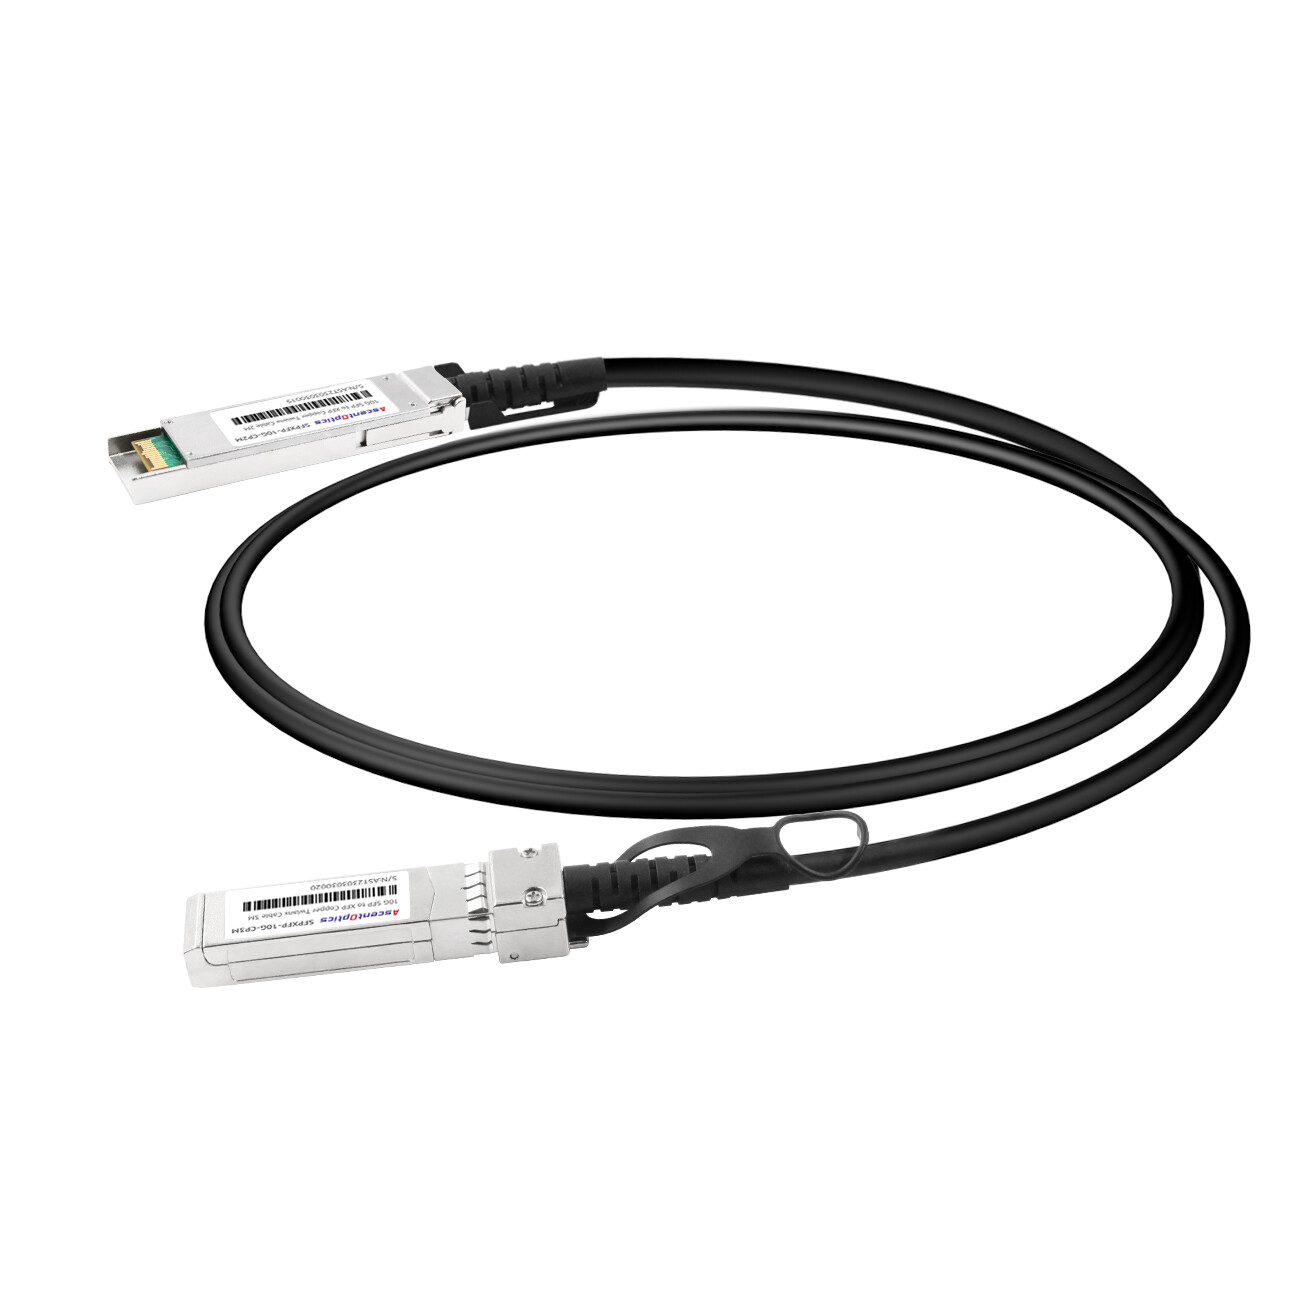 10G SFP+ to XFP Copper DAC Cable,2 Meters,Passive